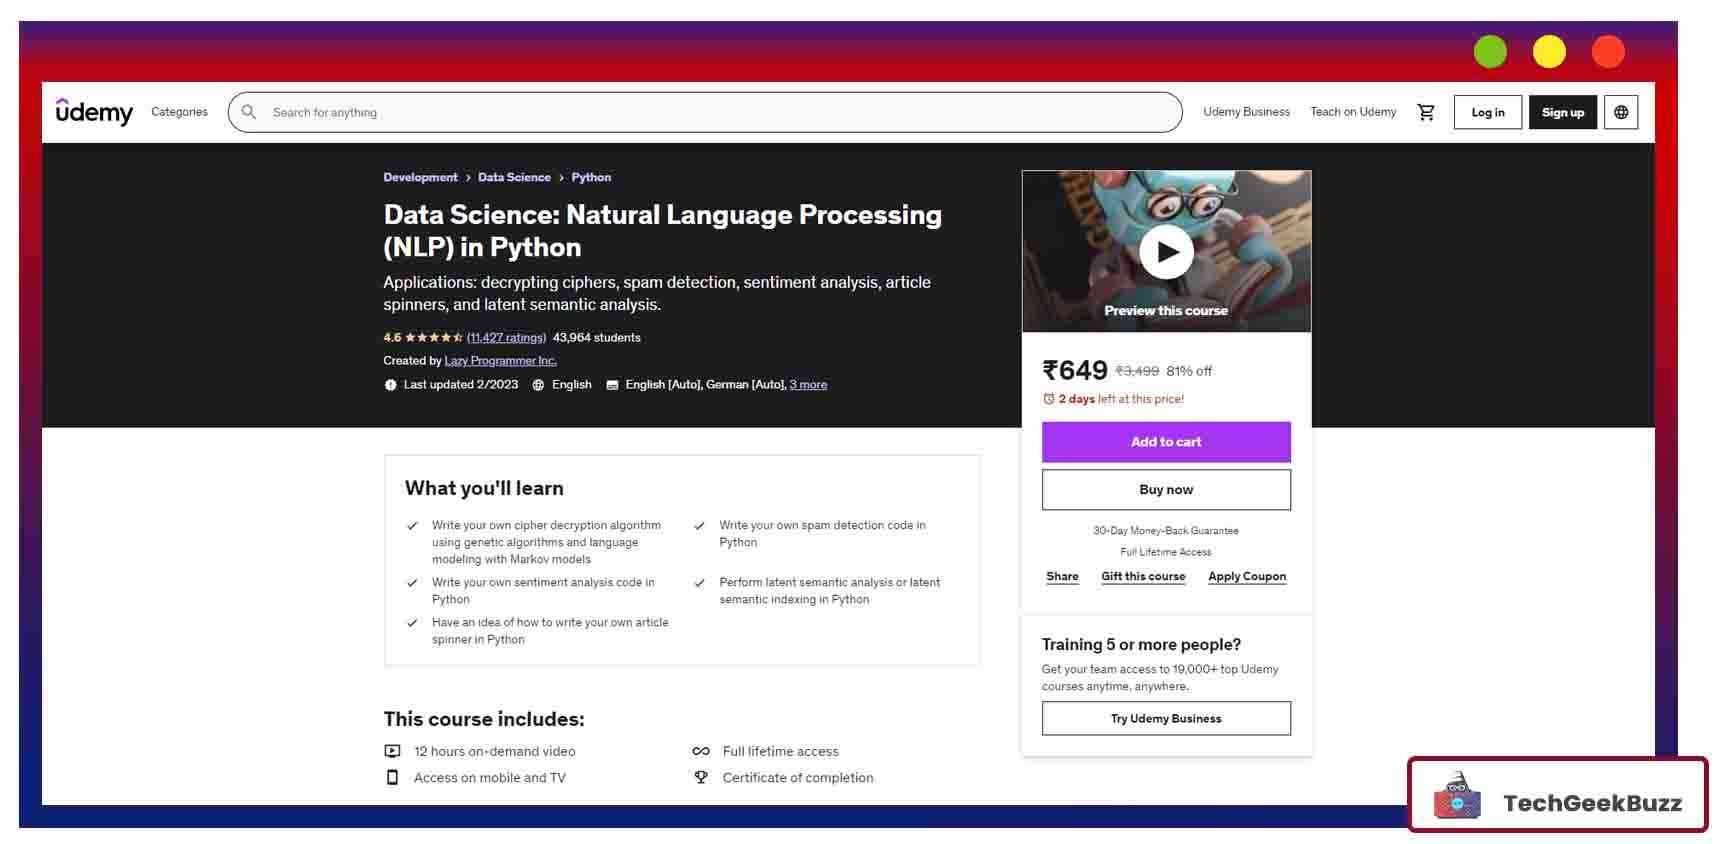 Data Science: Natural Language Processing (NLP) in Python